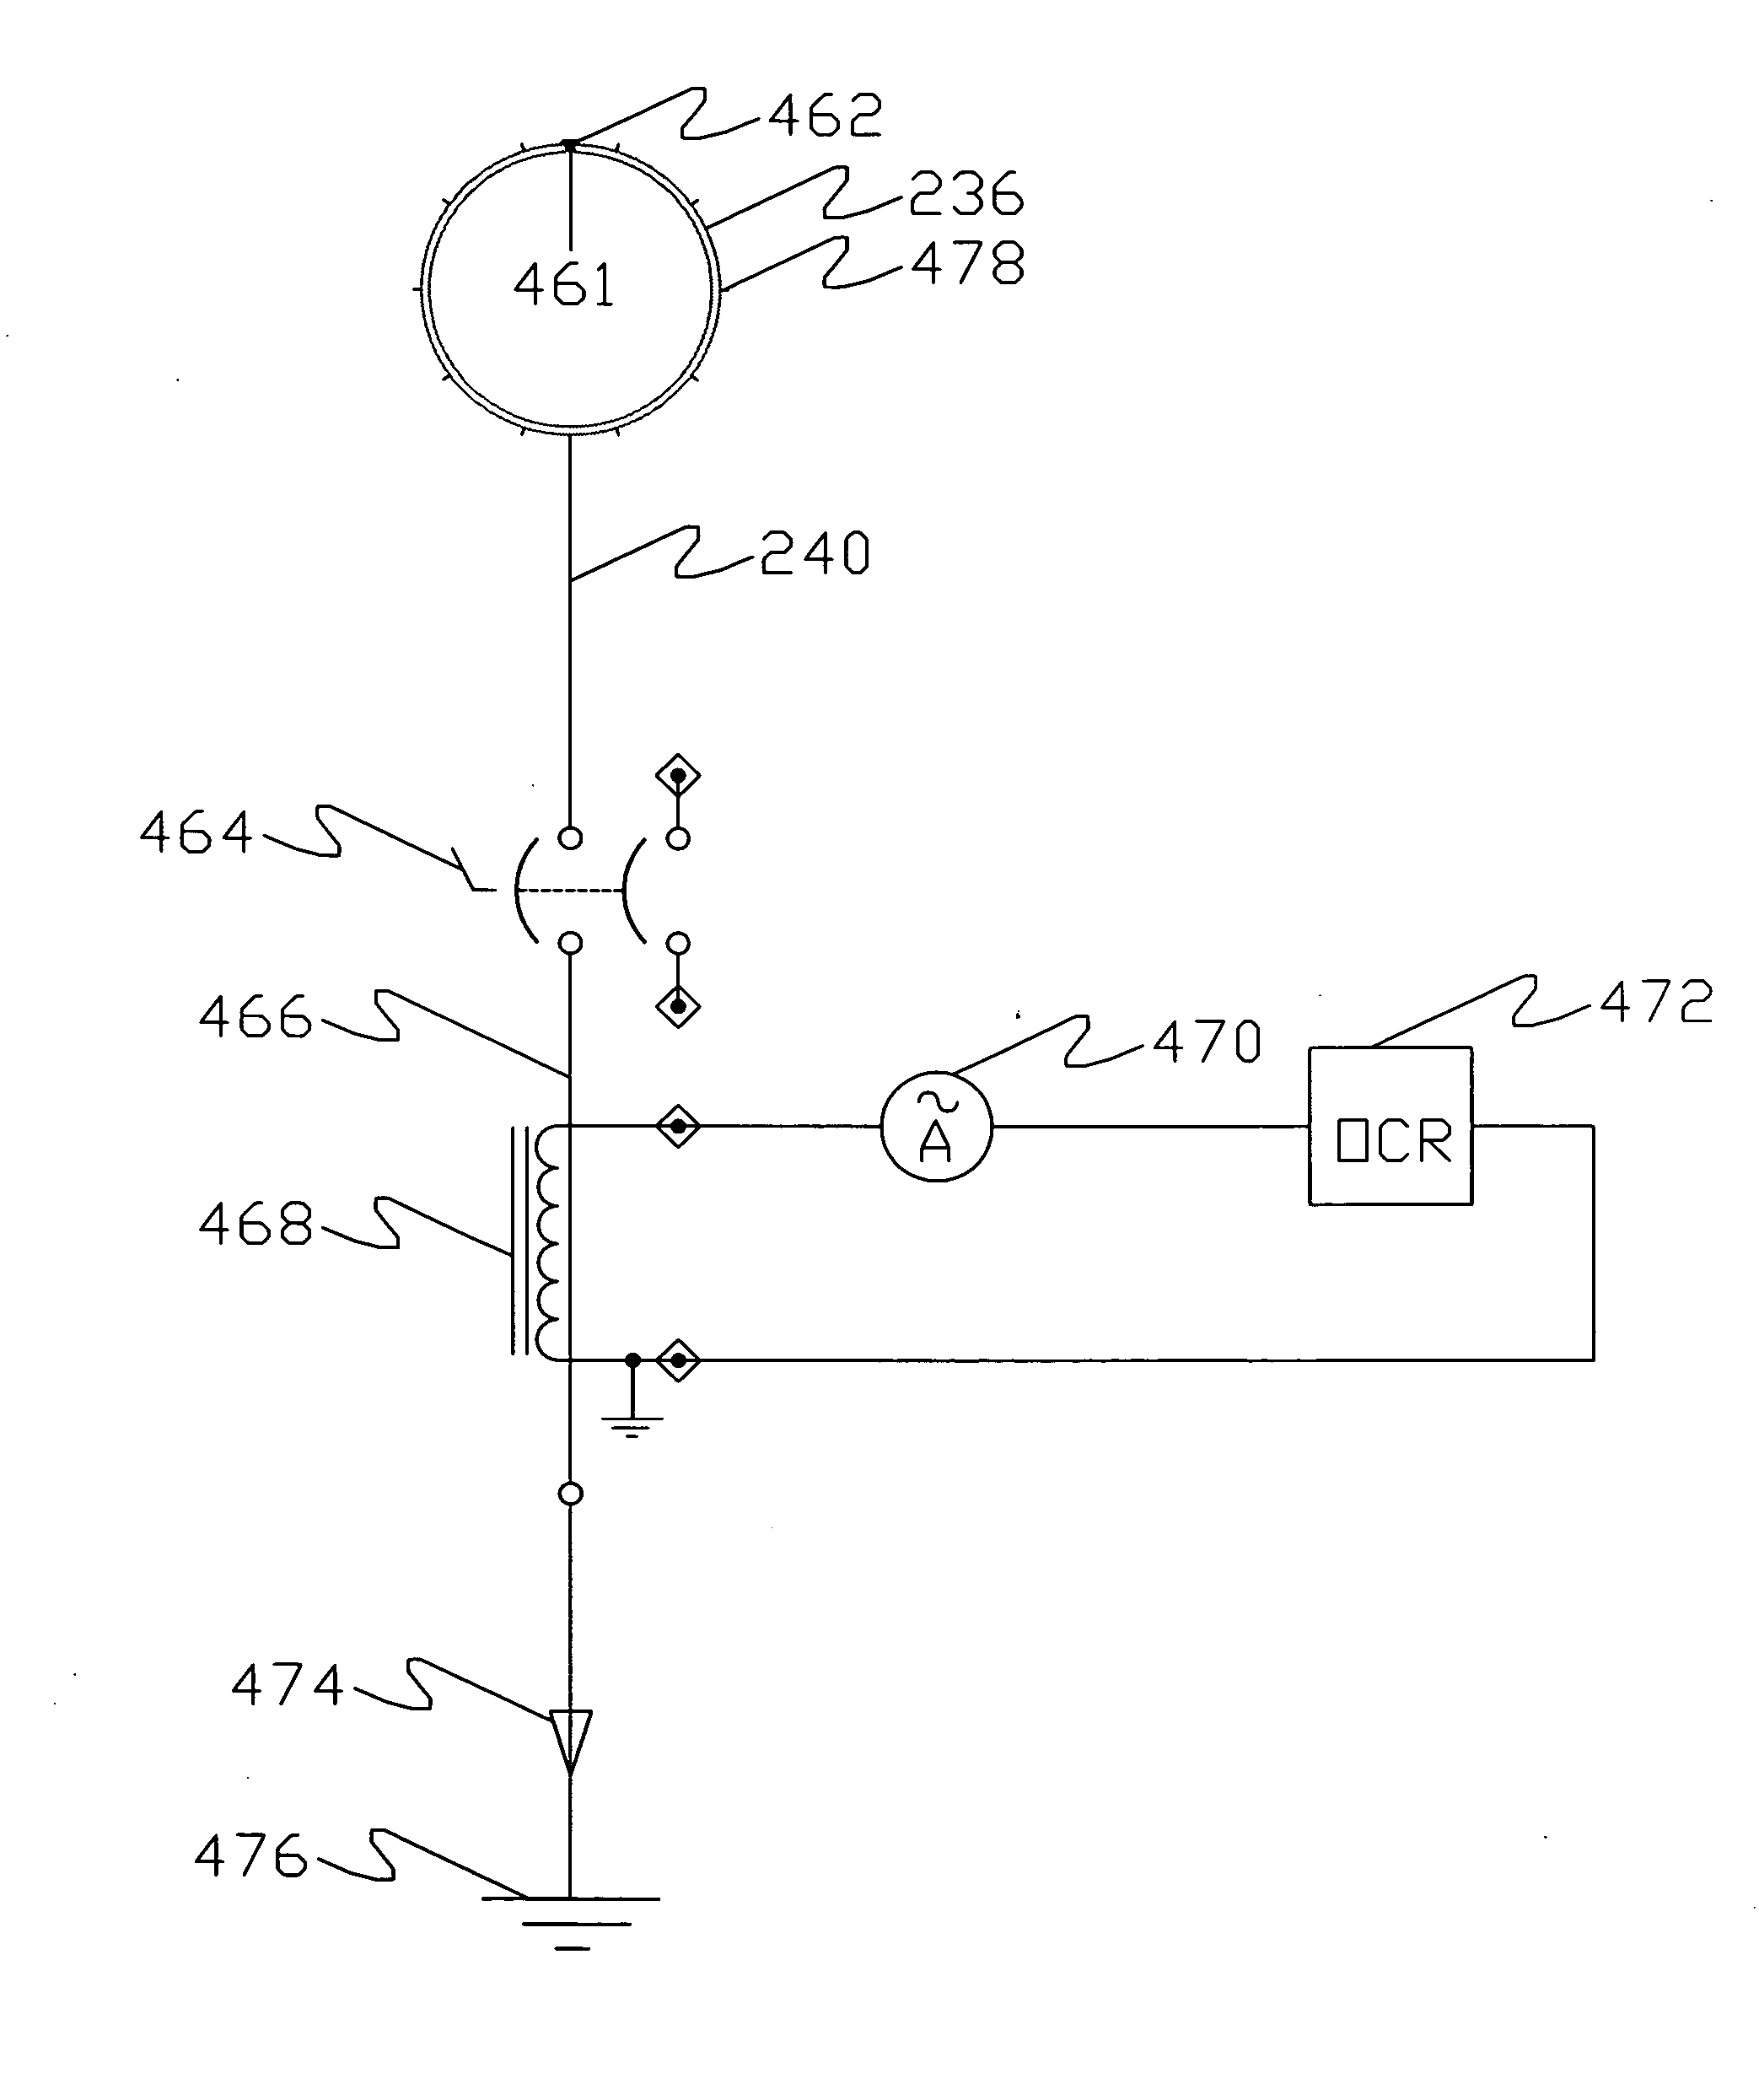 AC melt to bushing current detector